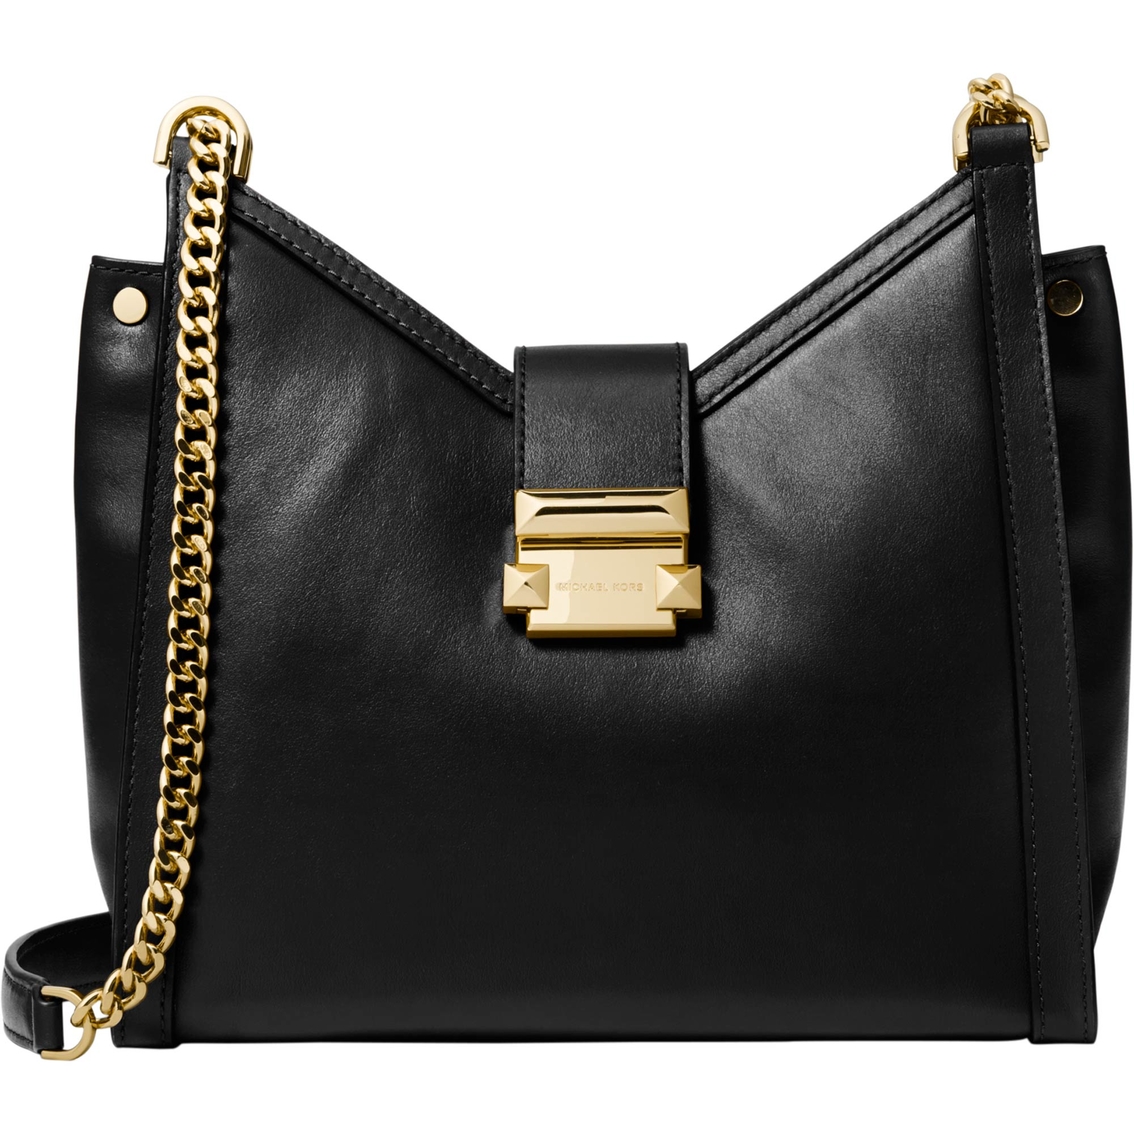 whitney small logo and leather shoulder bag